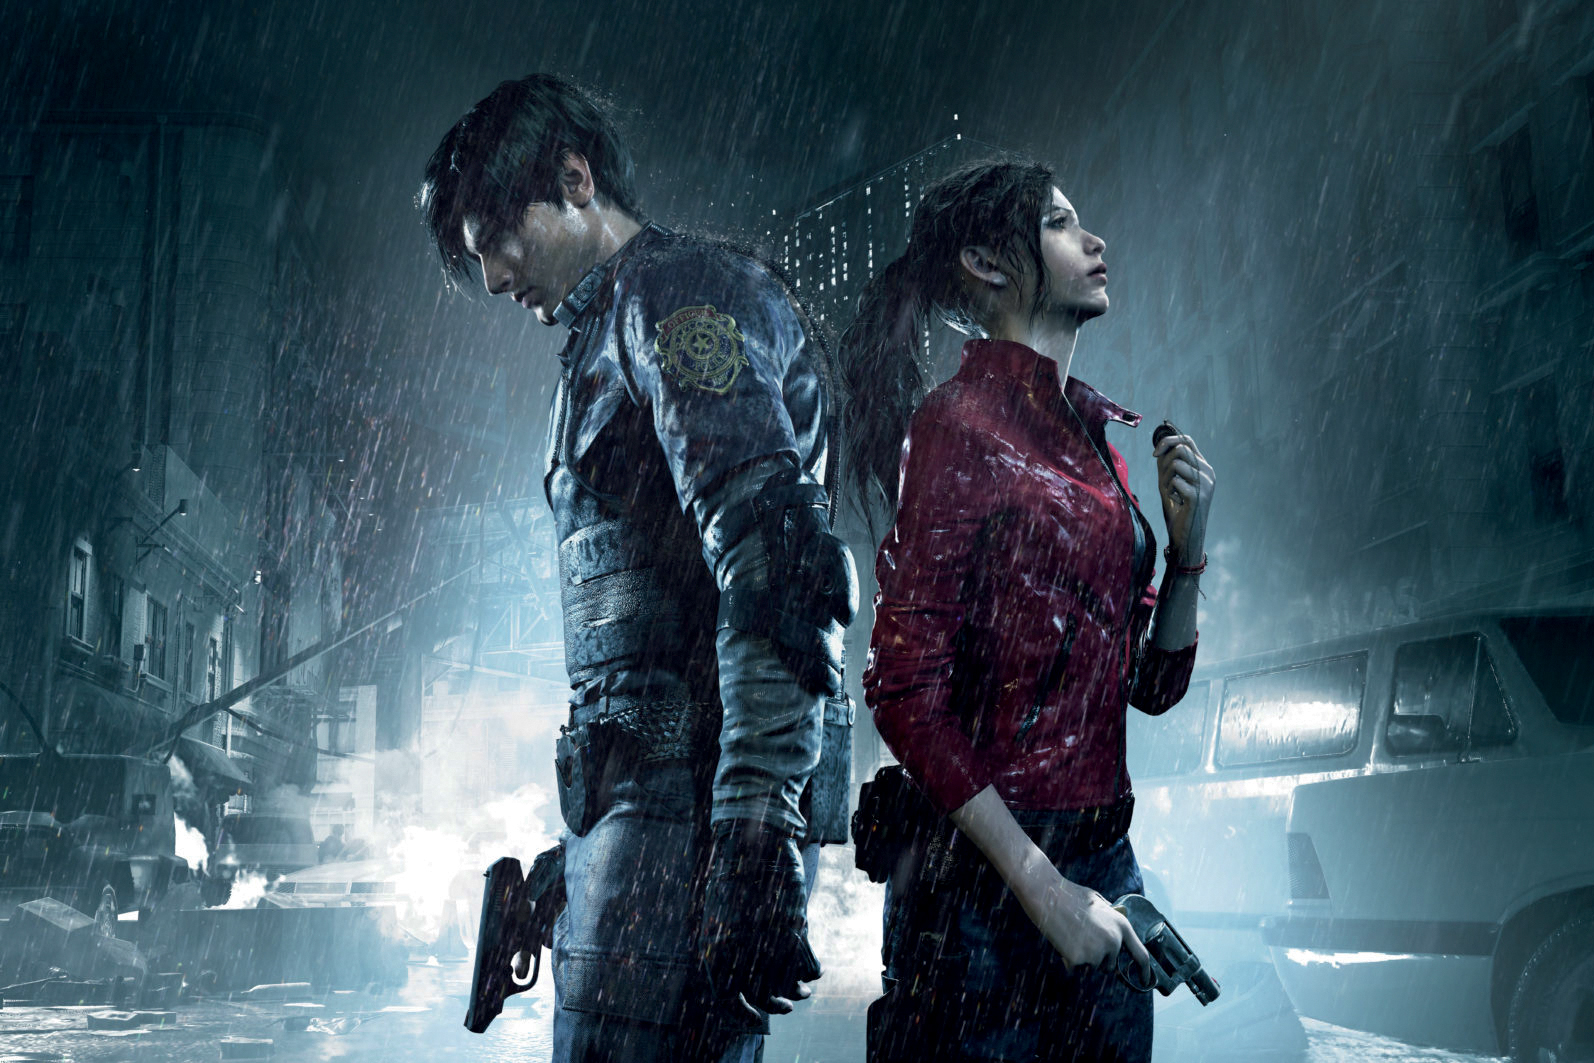 ICON - Resident Evil 2: title of the most popular franchise about zombies has been redone -